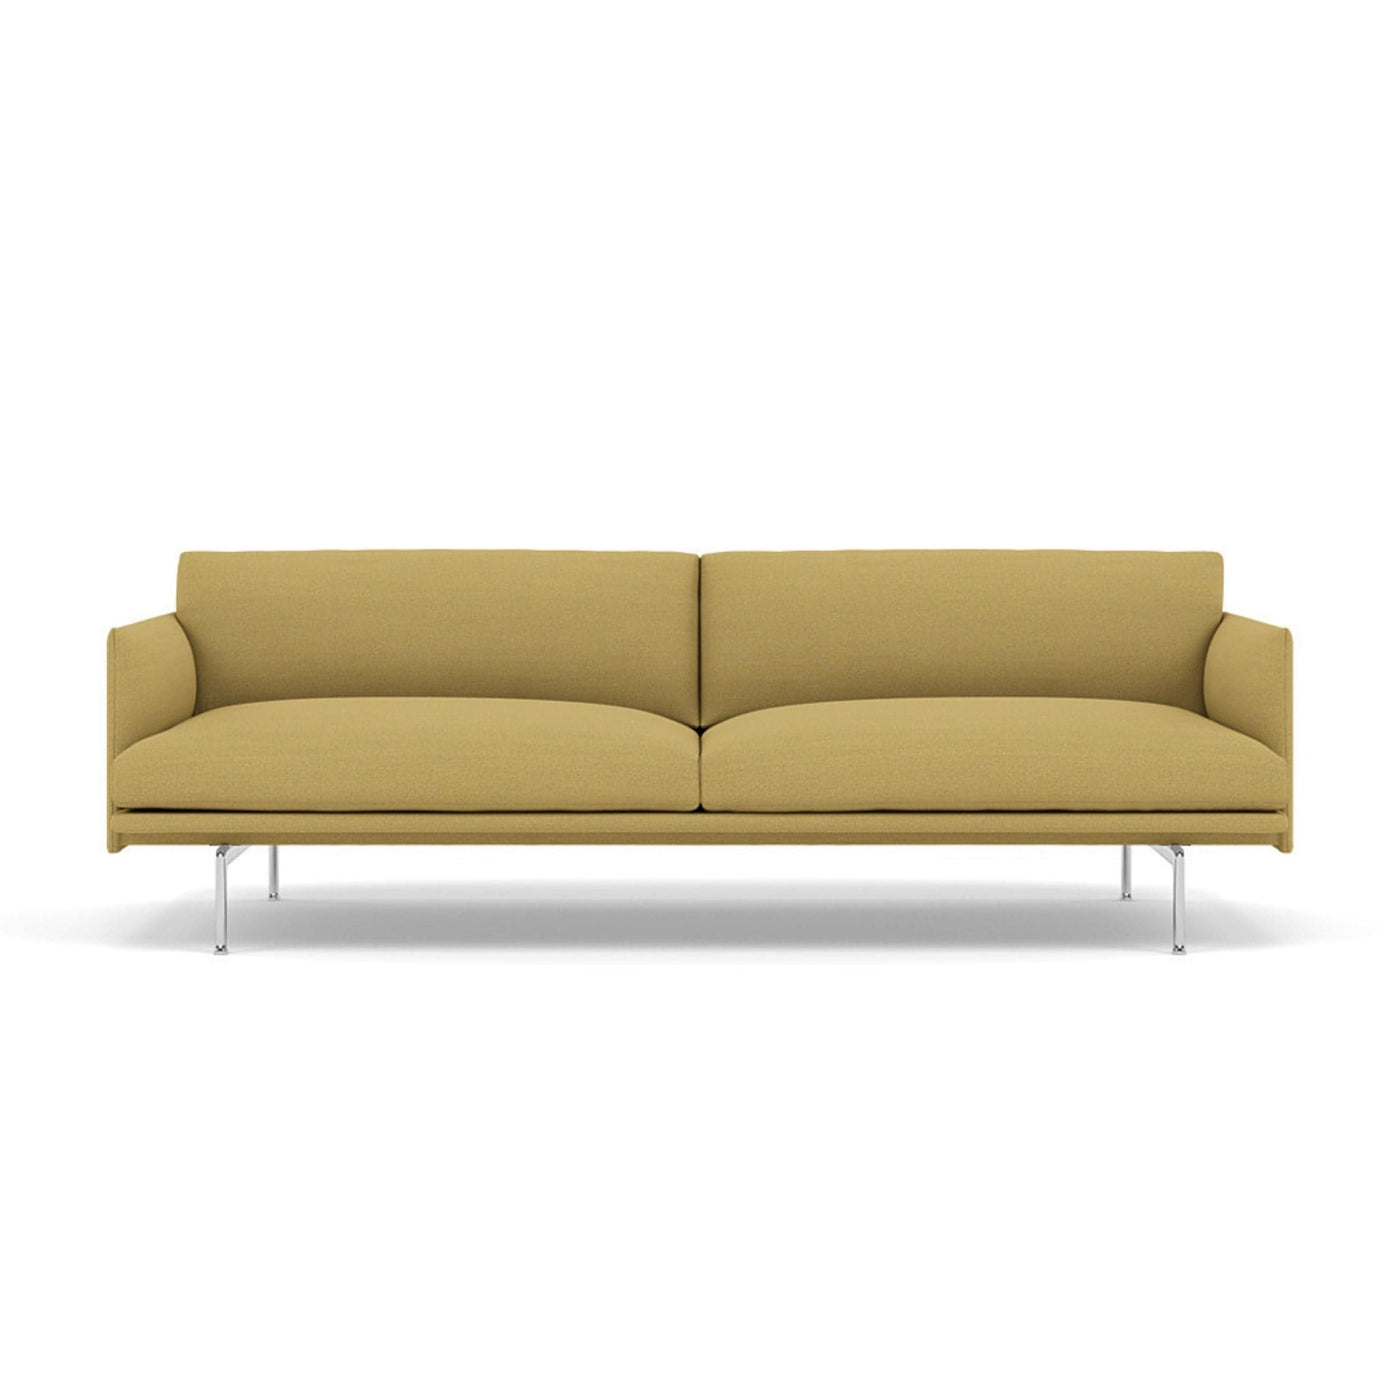 Muuto outline 3 seater sofa with polished aluminium legs. Made to order from someday designs. #colour_hallingdal-407